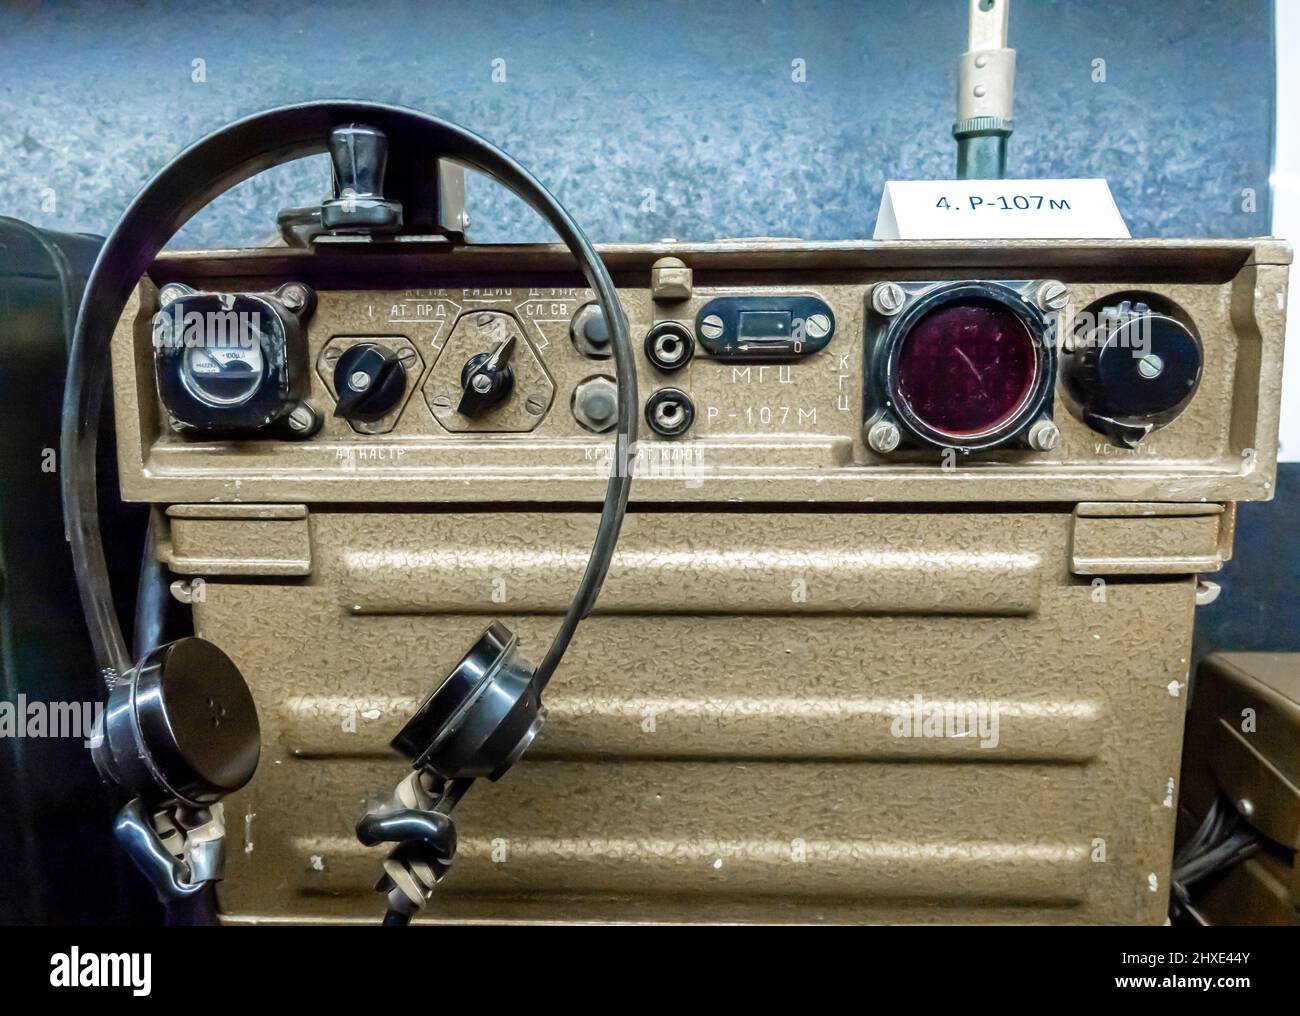 R-107 M is a Soviet radio used by civil defence and special forces.  Frequency range: 20 to 52 MHz, FM and CW. Bunker 703 museum, Moscow, Russia  Stock Photo - Alamy